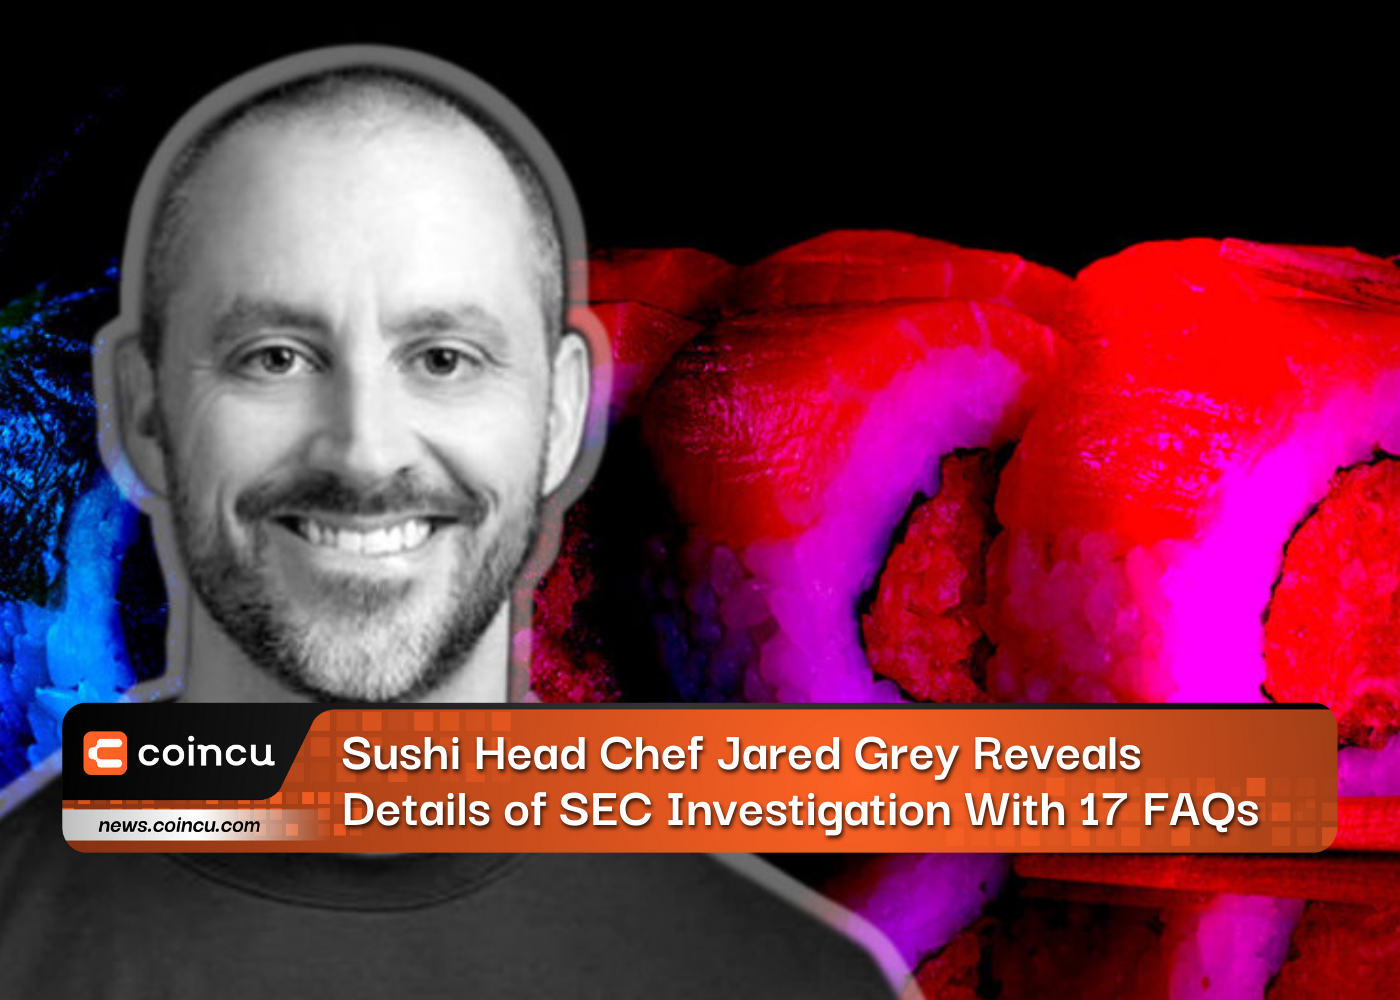 Sushi Head Chef Jared Grey Reveals Details of SEC Investigation With 17 FAQs